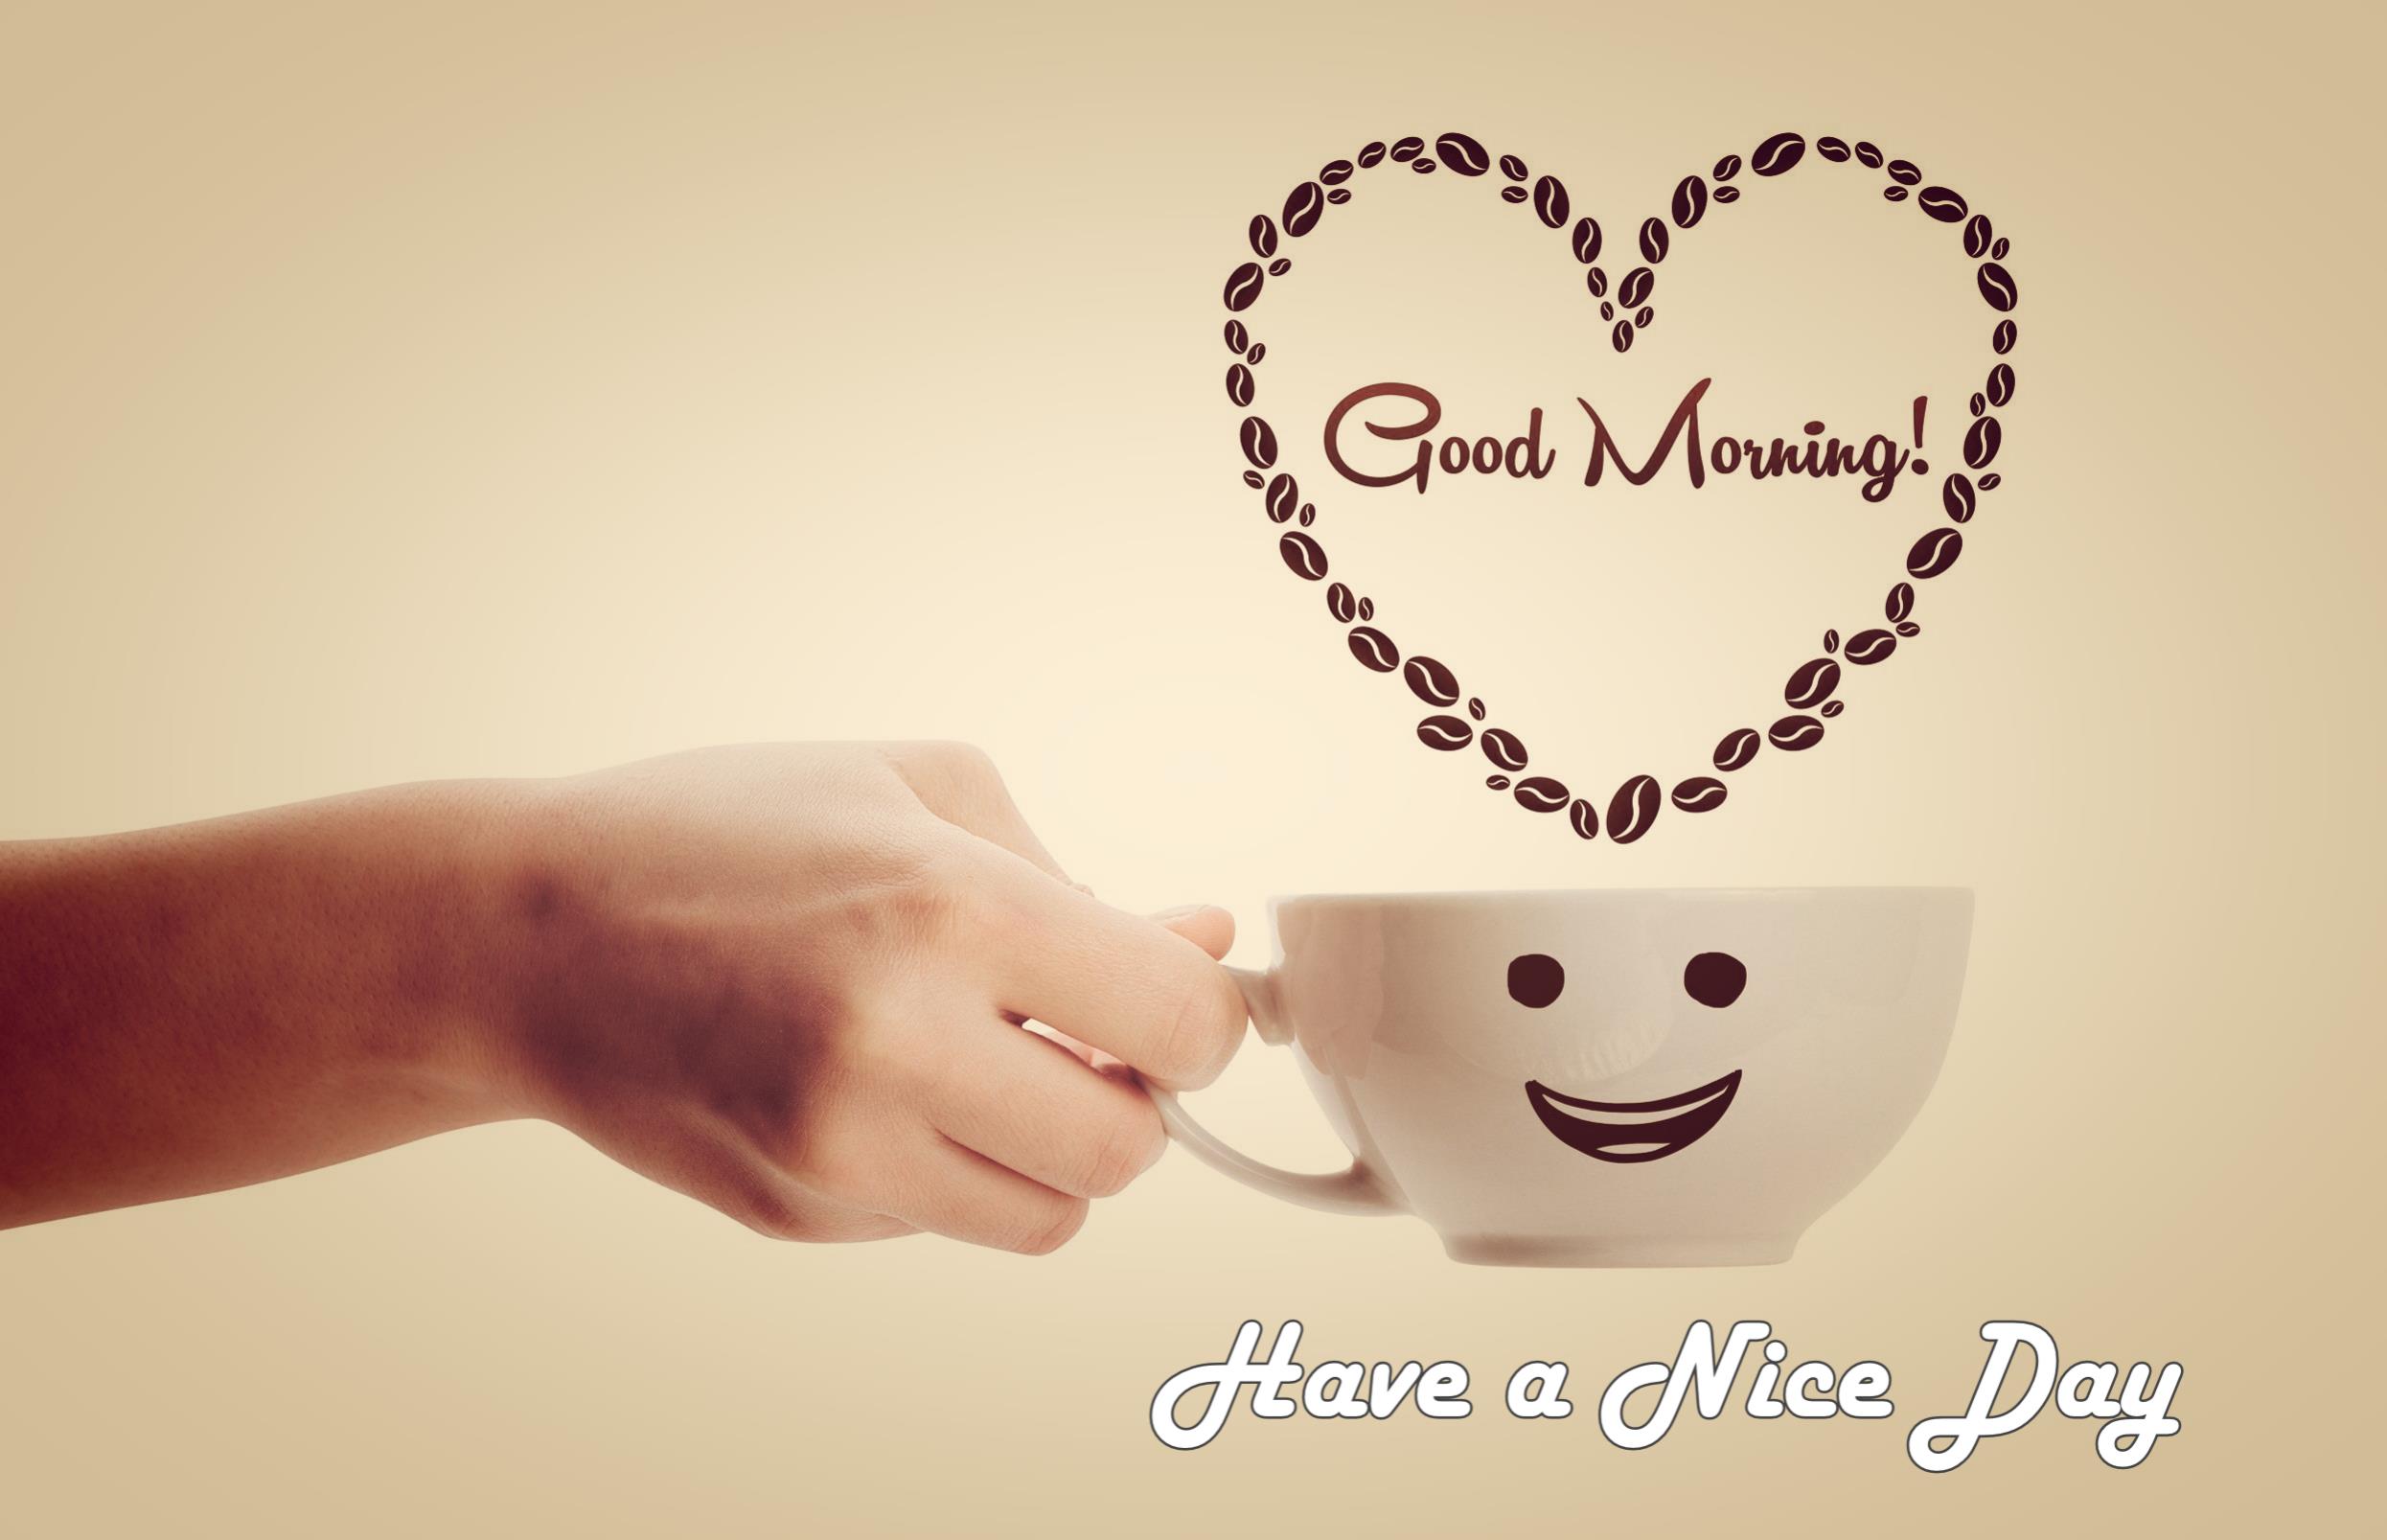 Latest-Good-Morning-images-Wallpaper